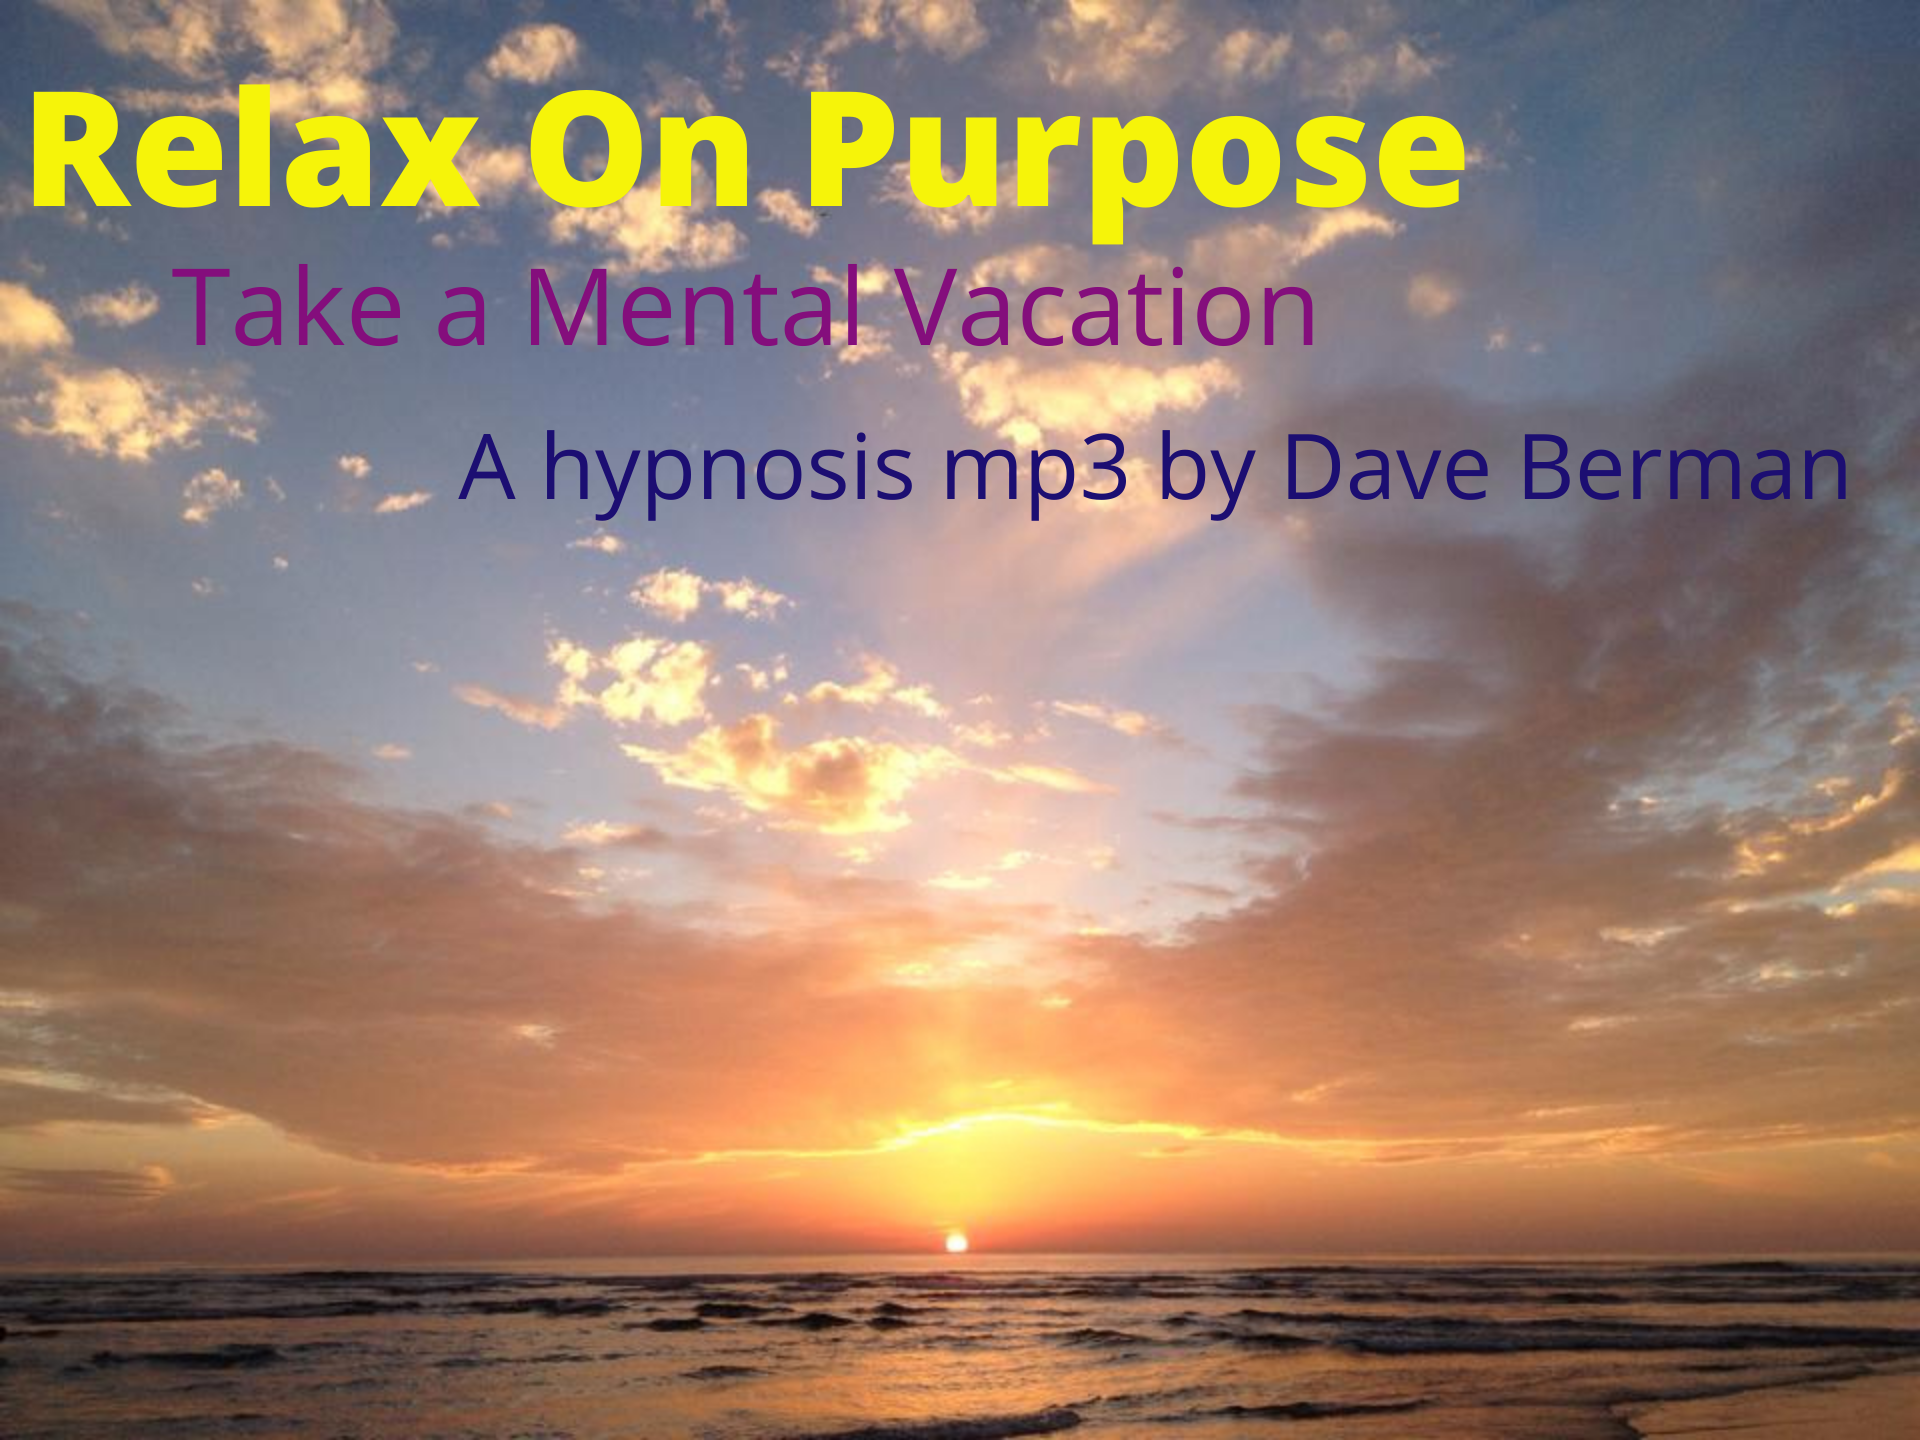 Beach sunset image with the words Relax On Purpose, Take a Mental Vacation, A hypnosis mp3 by Dave Berman